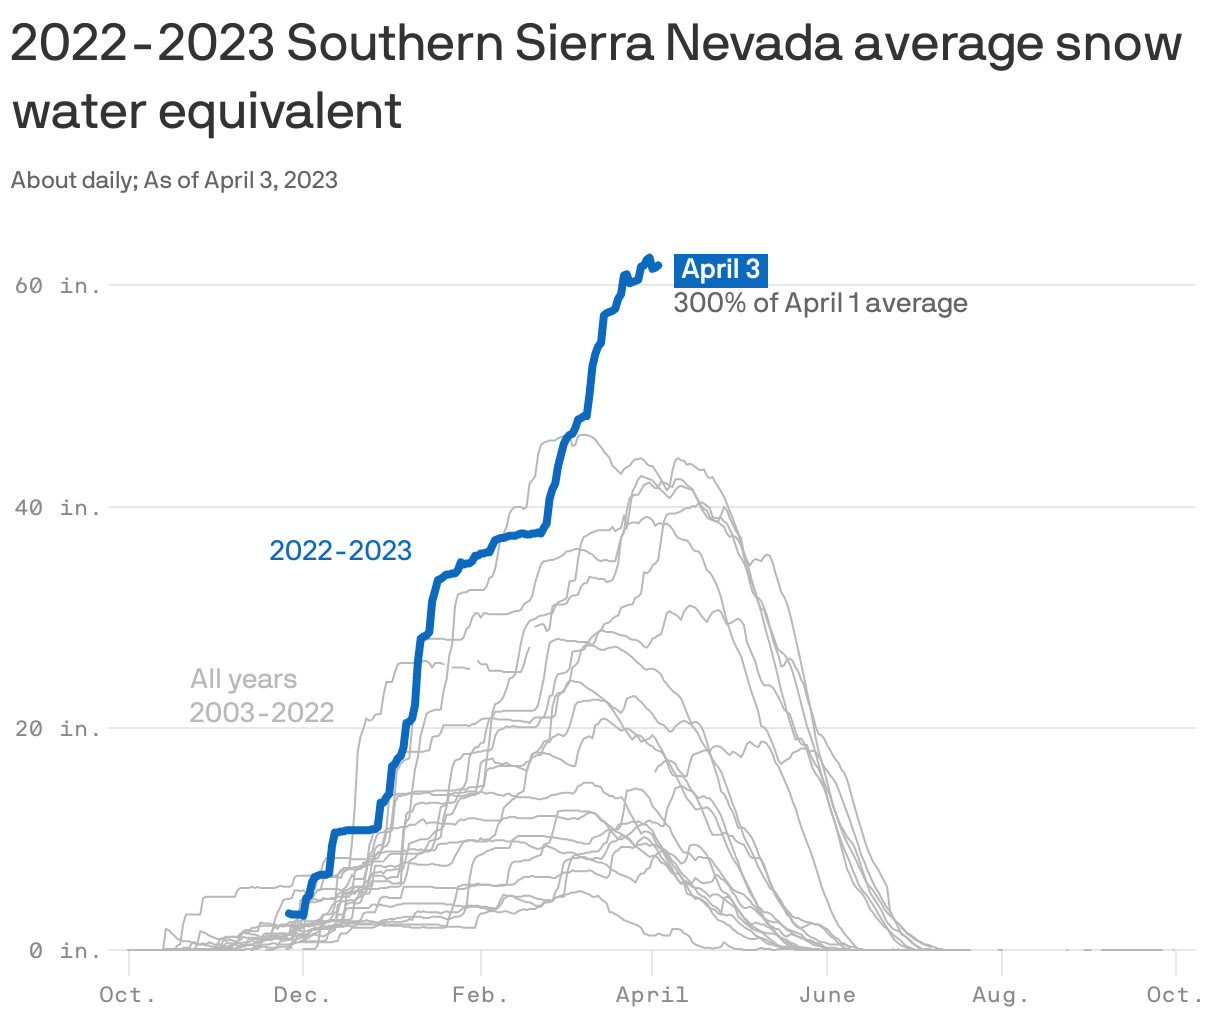 2022-2023 Southern Sierra Nevada average snow water equivalent